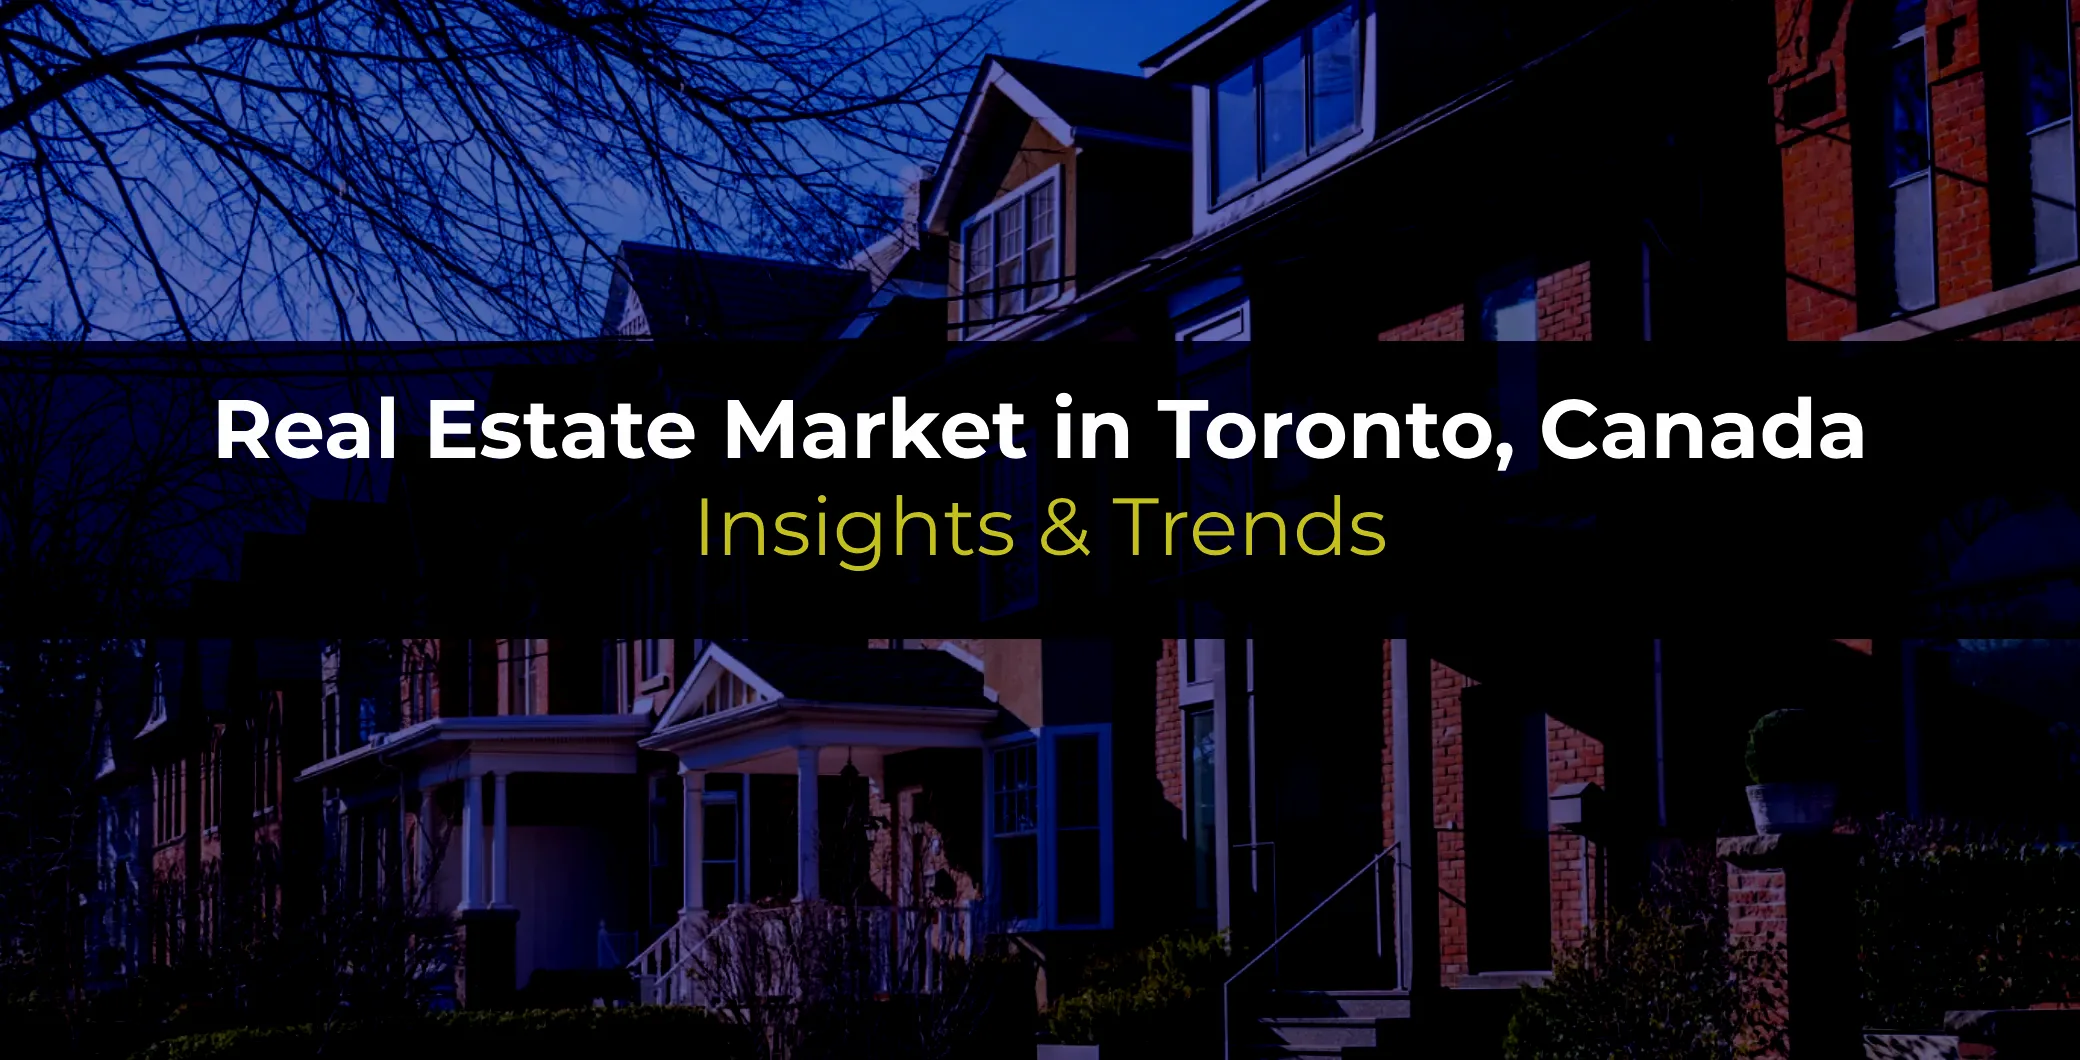 Real Estate Market in Toronto, Canada: Insights & Trends